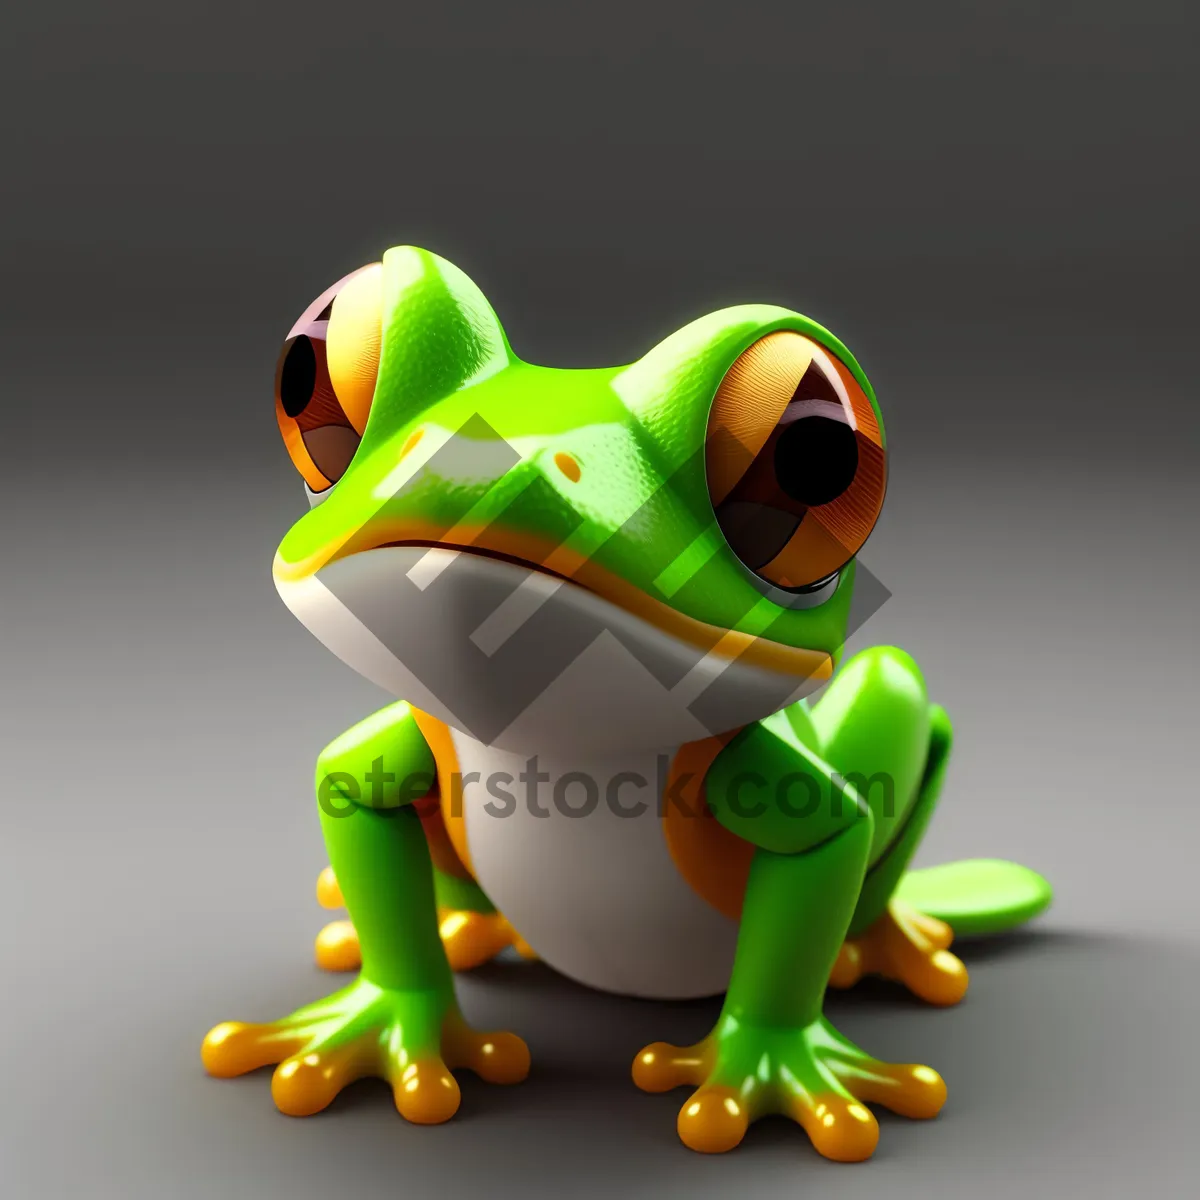 Picture of Cute Cartoon Frog with Big Eyed Expression